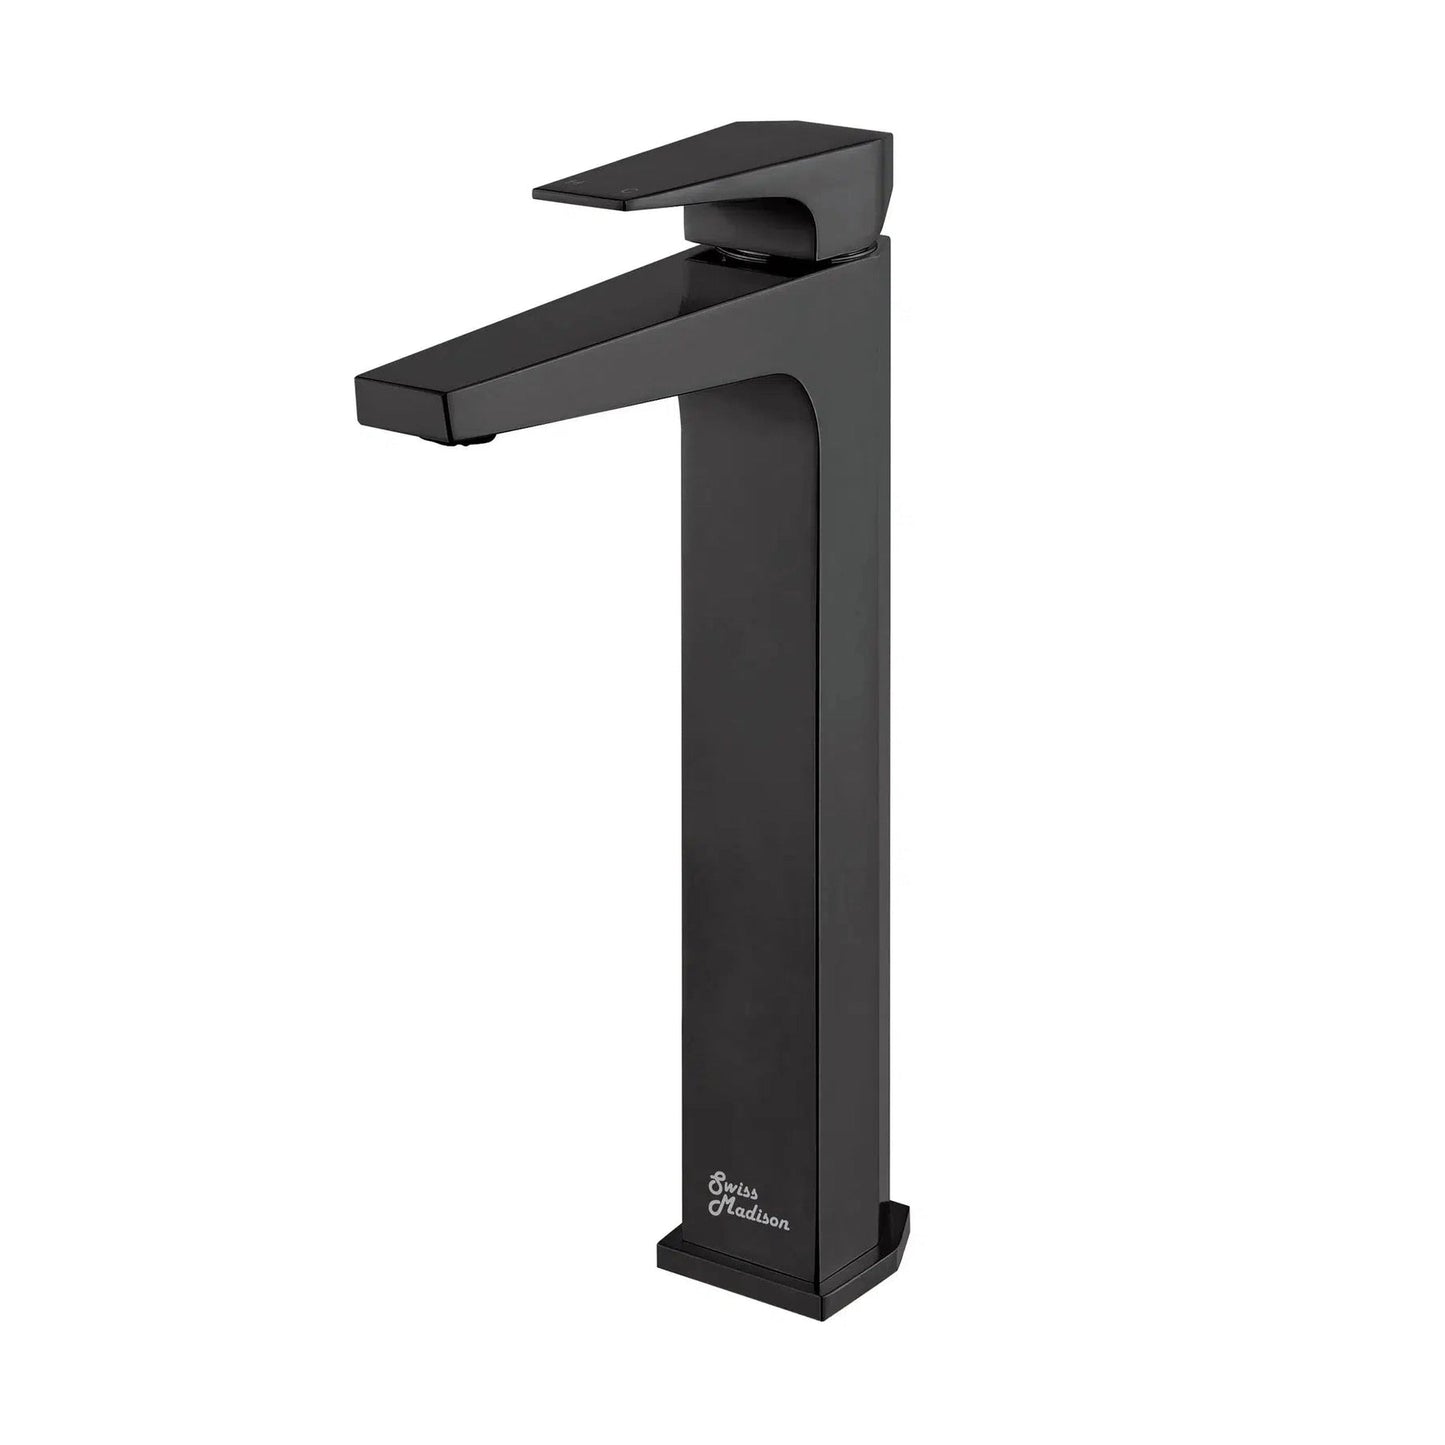 Swiss Madison Voltaire 11" Matte Black Single Hole Bathroom Faucet With Flow Rate of 1.5 GPM